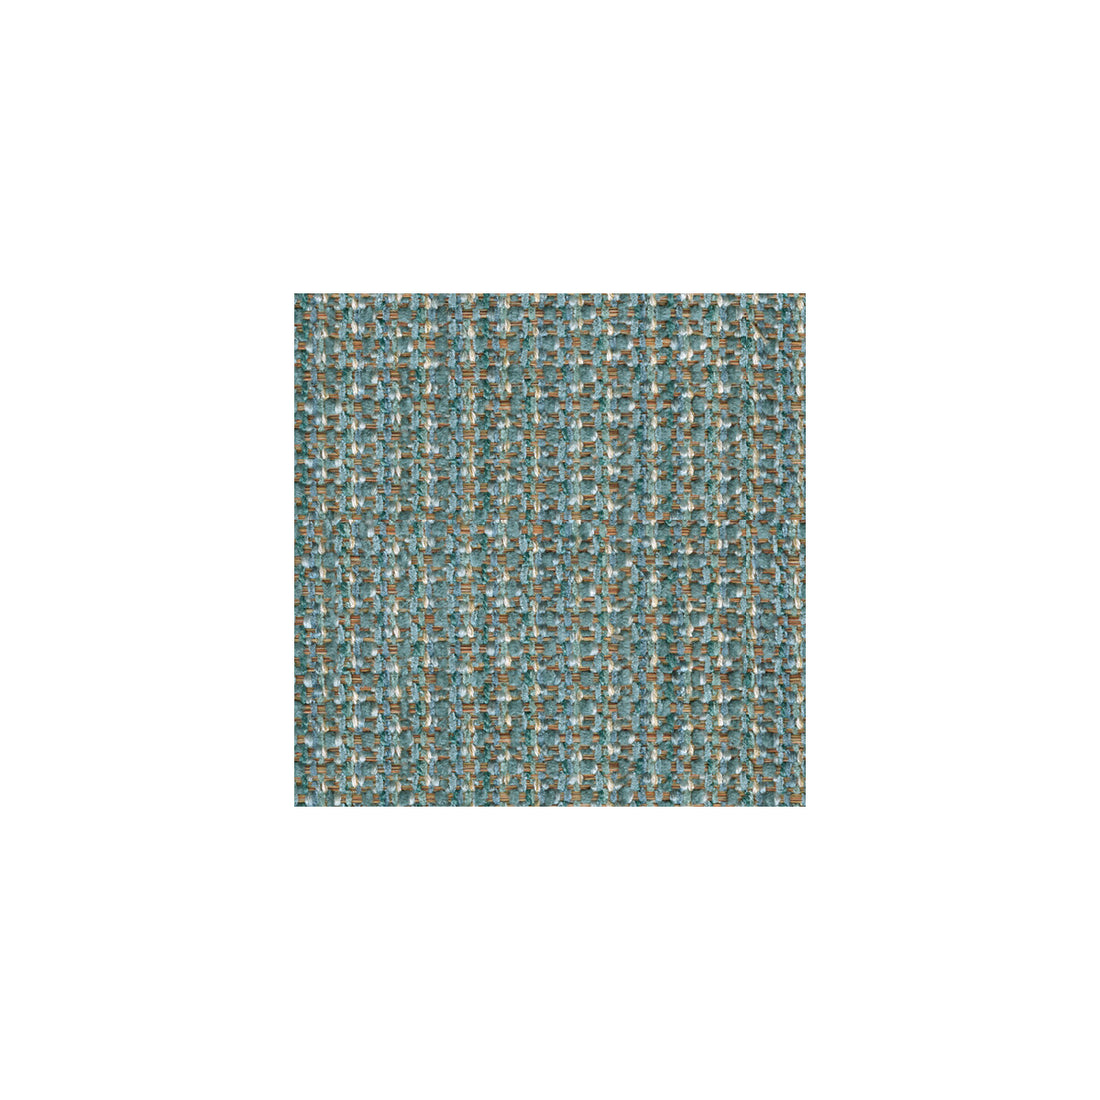 Chenille Tweed fabric in bermuda color - pattern 30962.135.0 - by Kravet Smart in the Gis collection